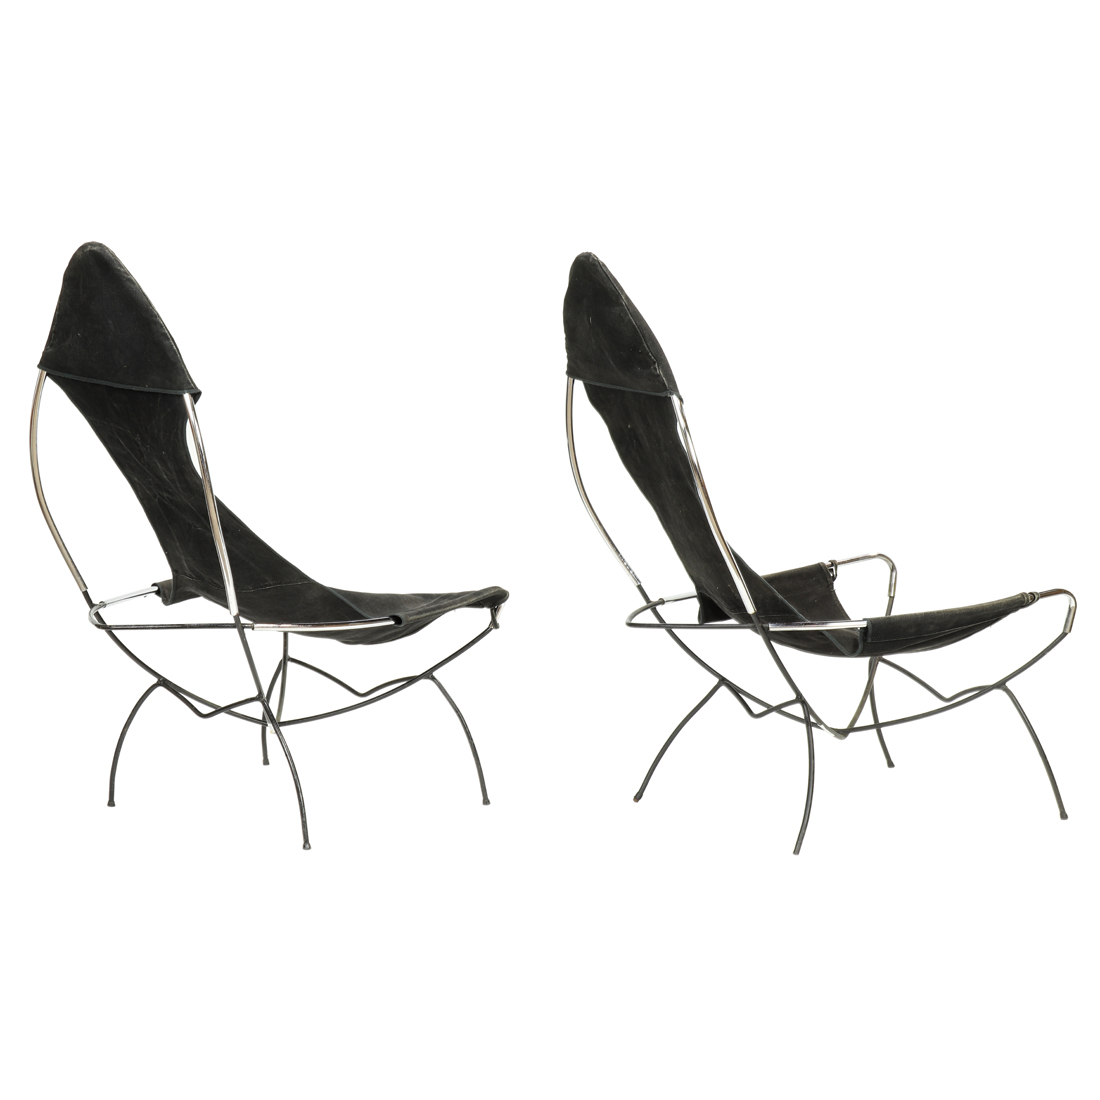 A PAIR OF TONY PAUL SLING CHAIRS